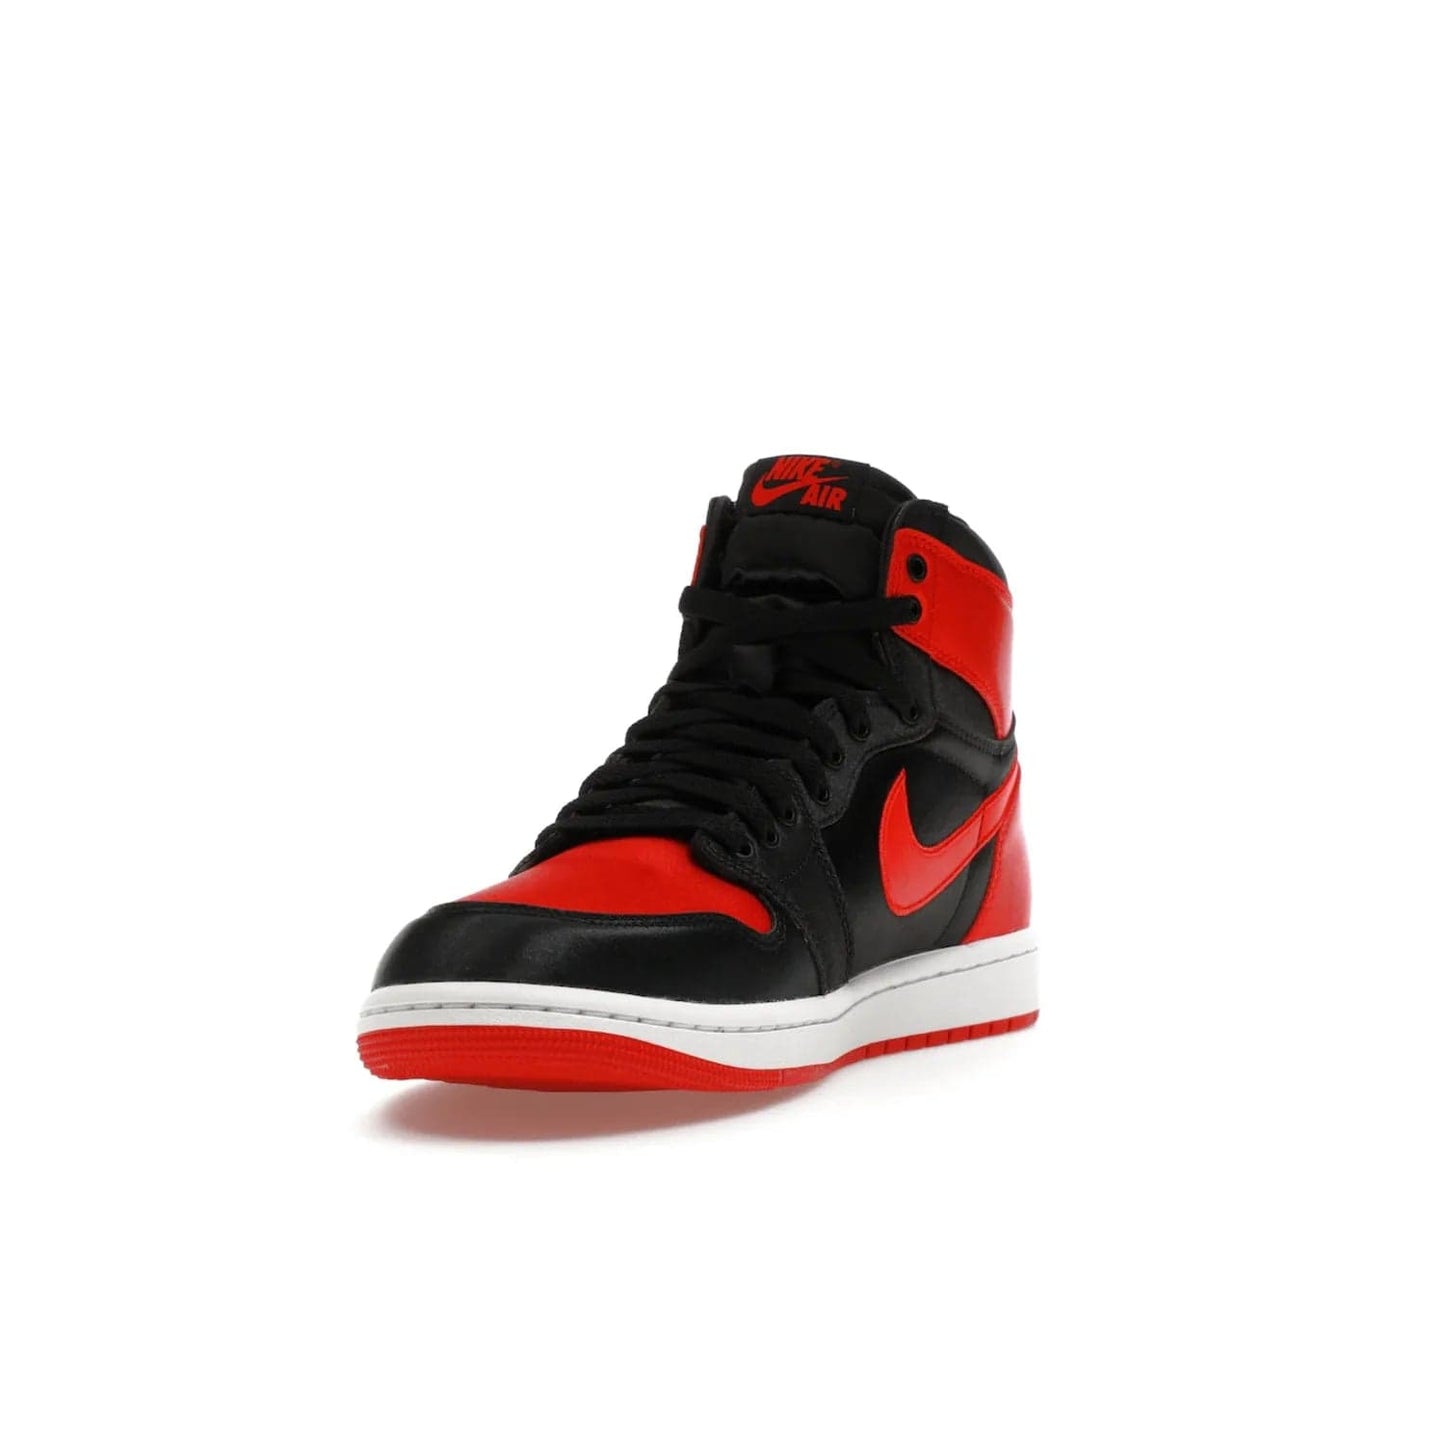 Jordan 1 Retro High OG Satin Bred (Women's) - Image 13 - Only at www.BallersClubKickz.com - Introducing the Jordan 1 Retro High OG Satin Bred (Women's). Luxe satin finish, contrasting hues & classic accents. Trending sneakers symbolizing timelessness & heritage. Make a bold statement with this iconic shoe. Available October 4, 2023.